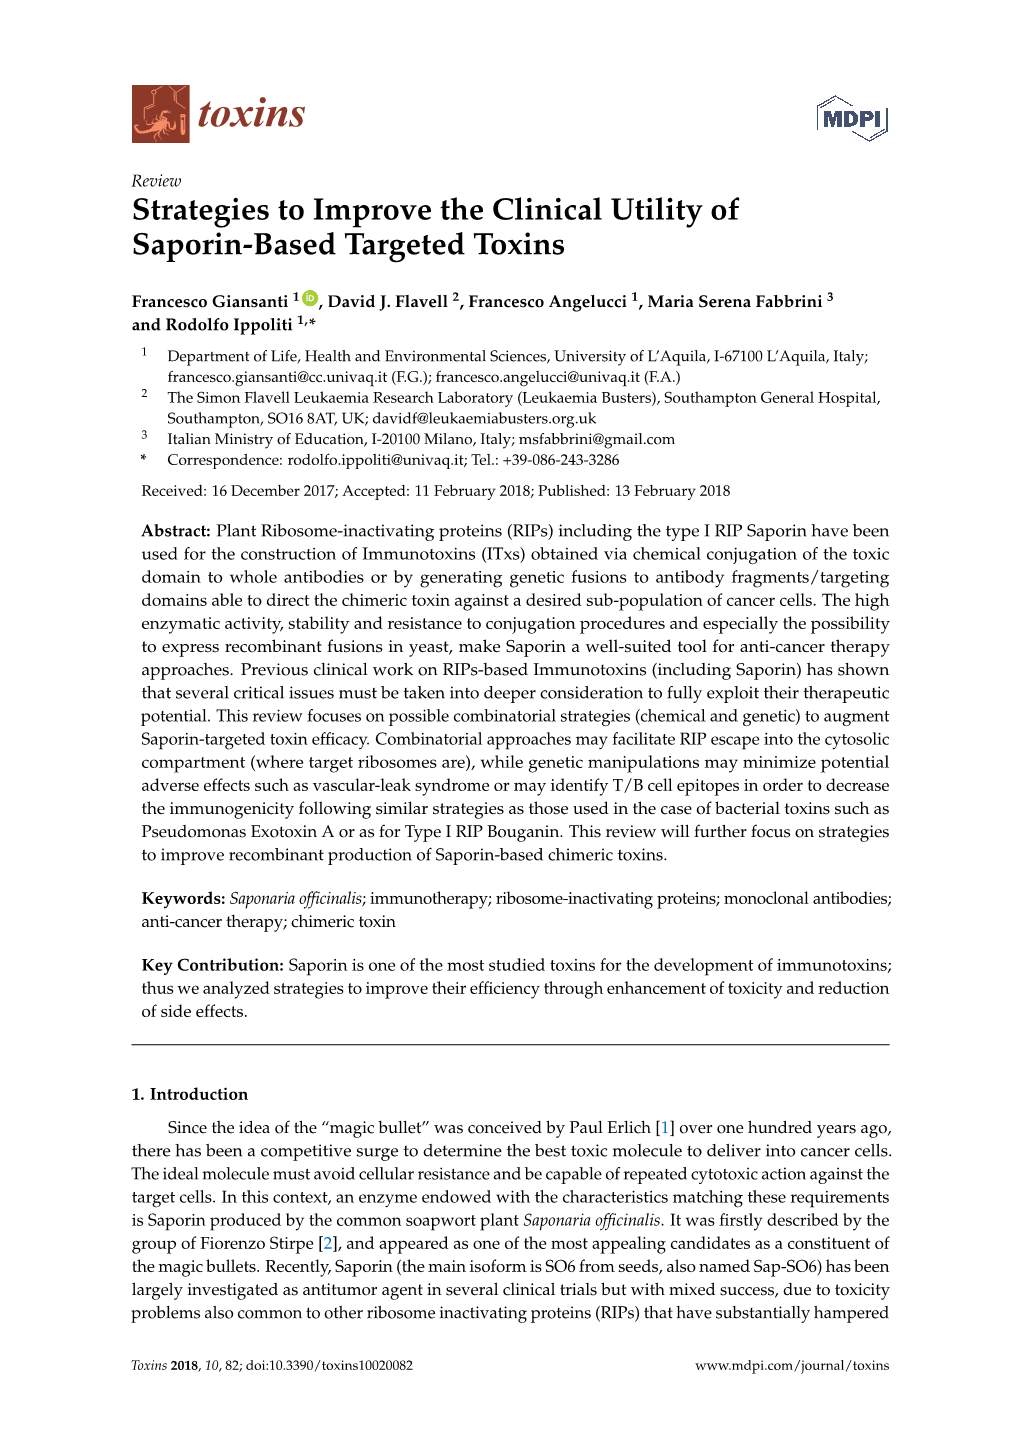 Strategies to Improve the Clinical Utility of Saporin-Based Targeted Toxins